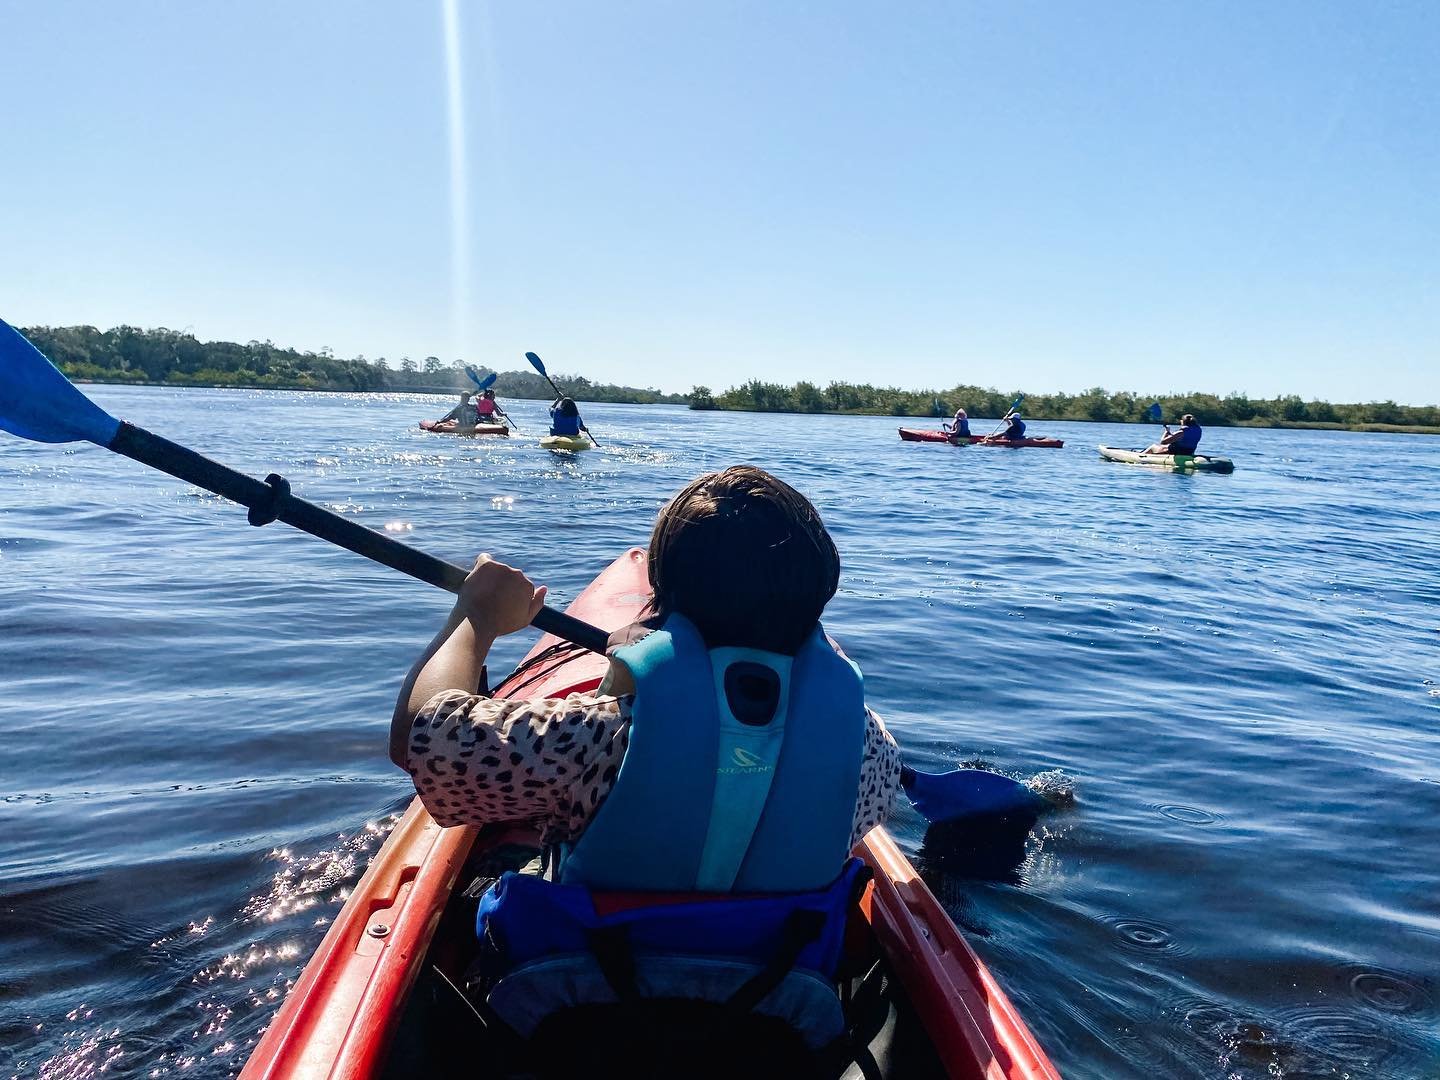 This Sunday is our first Kayaks &amp; Communion of the year! Don&rsquo;t forget to reserve a kayak or canoe (or bring your own)!

Our pontoon boat is full, but you can sign up for the waitlist in case anyone drops out last minute. 

Join us at Tomoka